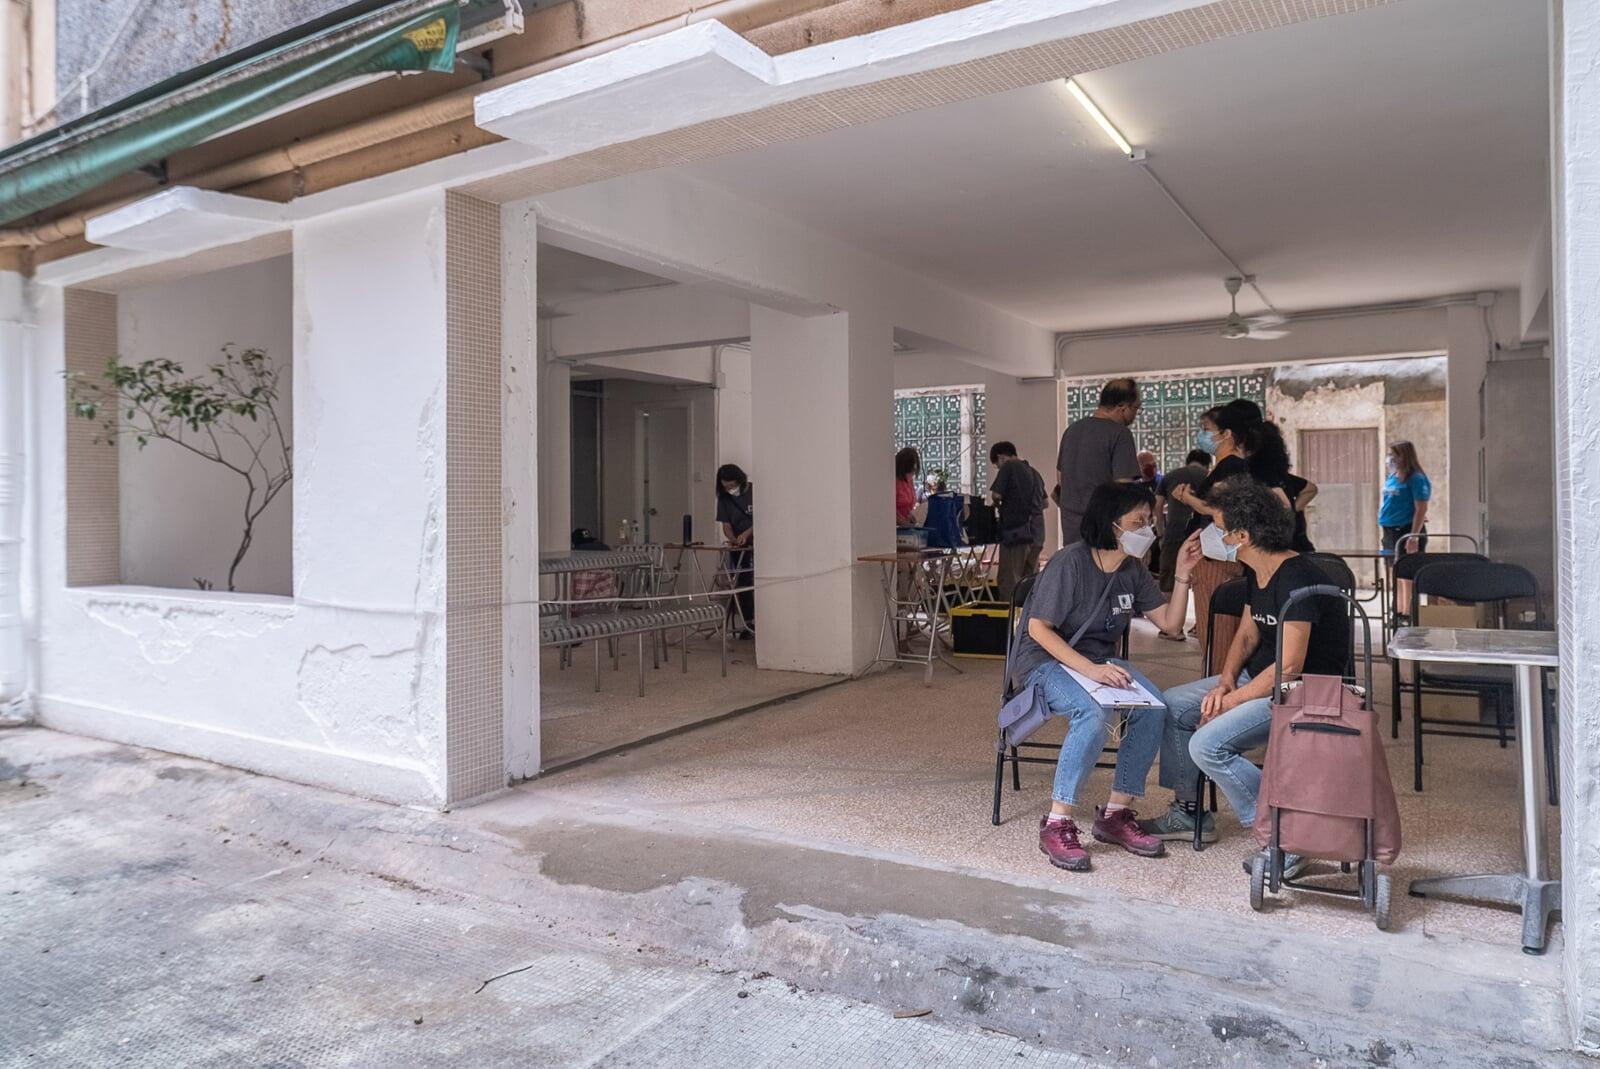 How an old empty Hong Kong building became a homeless shelter and could serve as the template to get more people off the streets